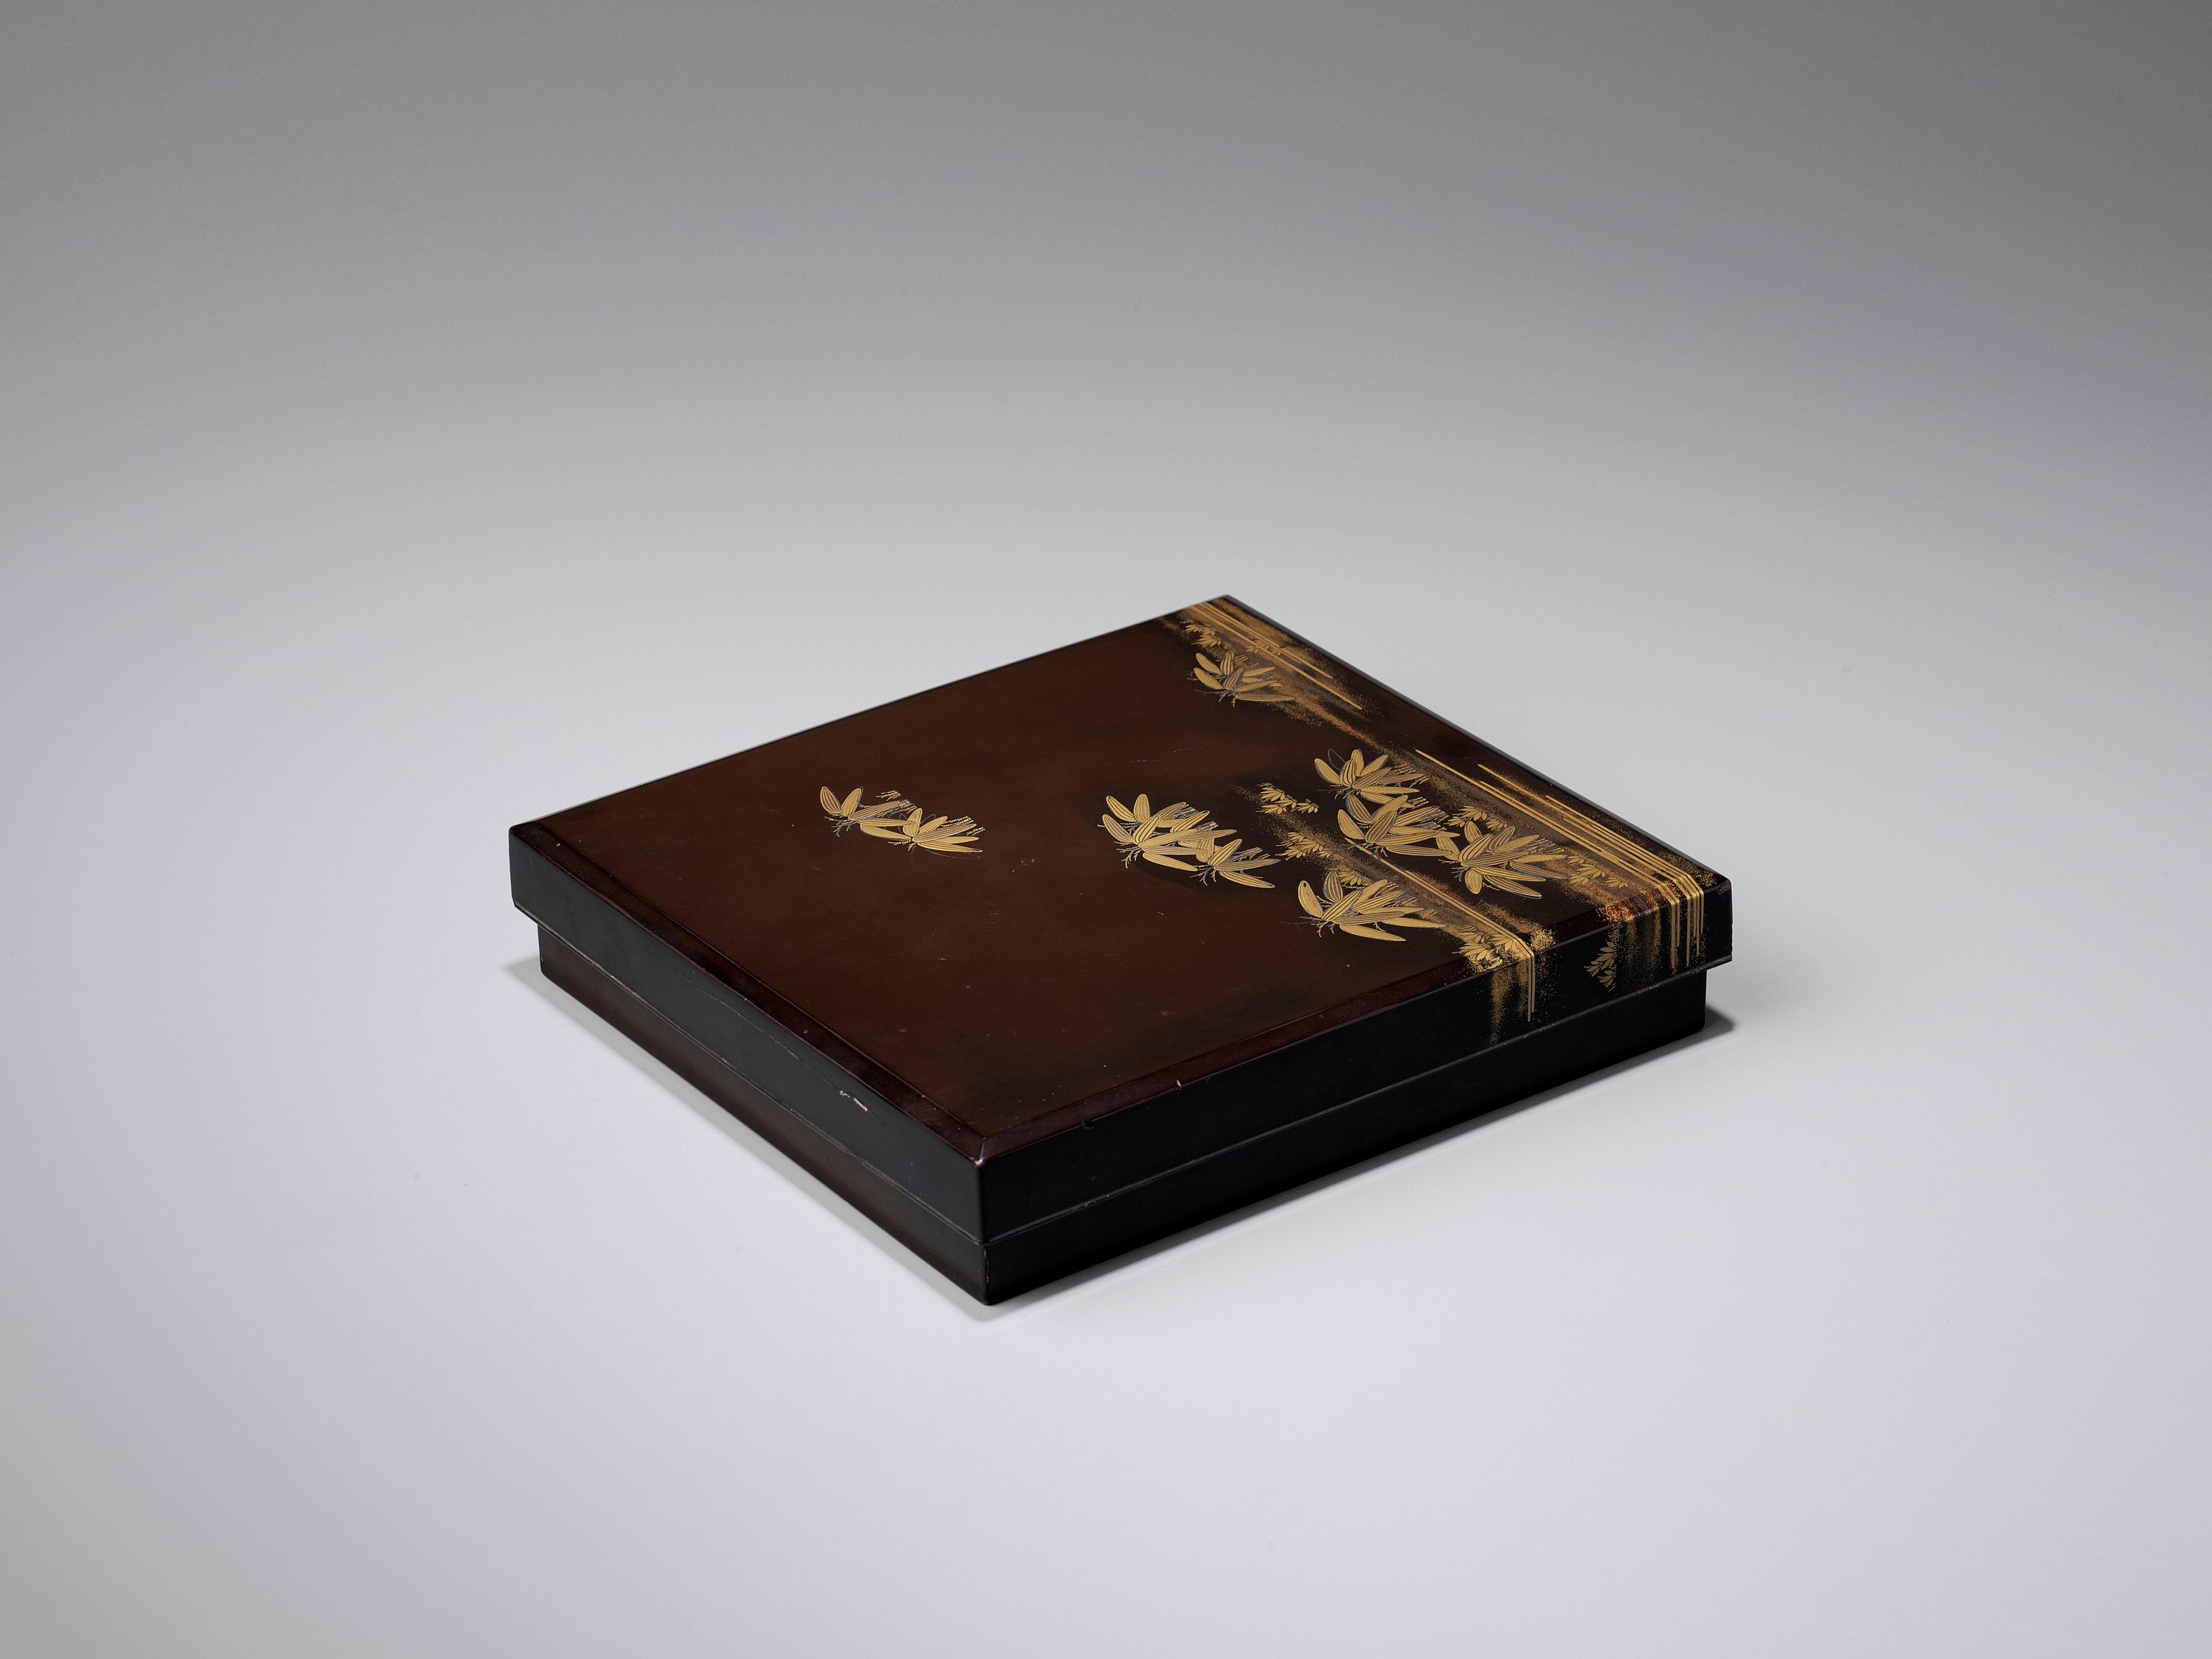 A LACQUER SUZURIBAKO DEPICTING BAMBOO - Image 9 of 9